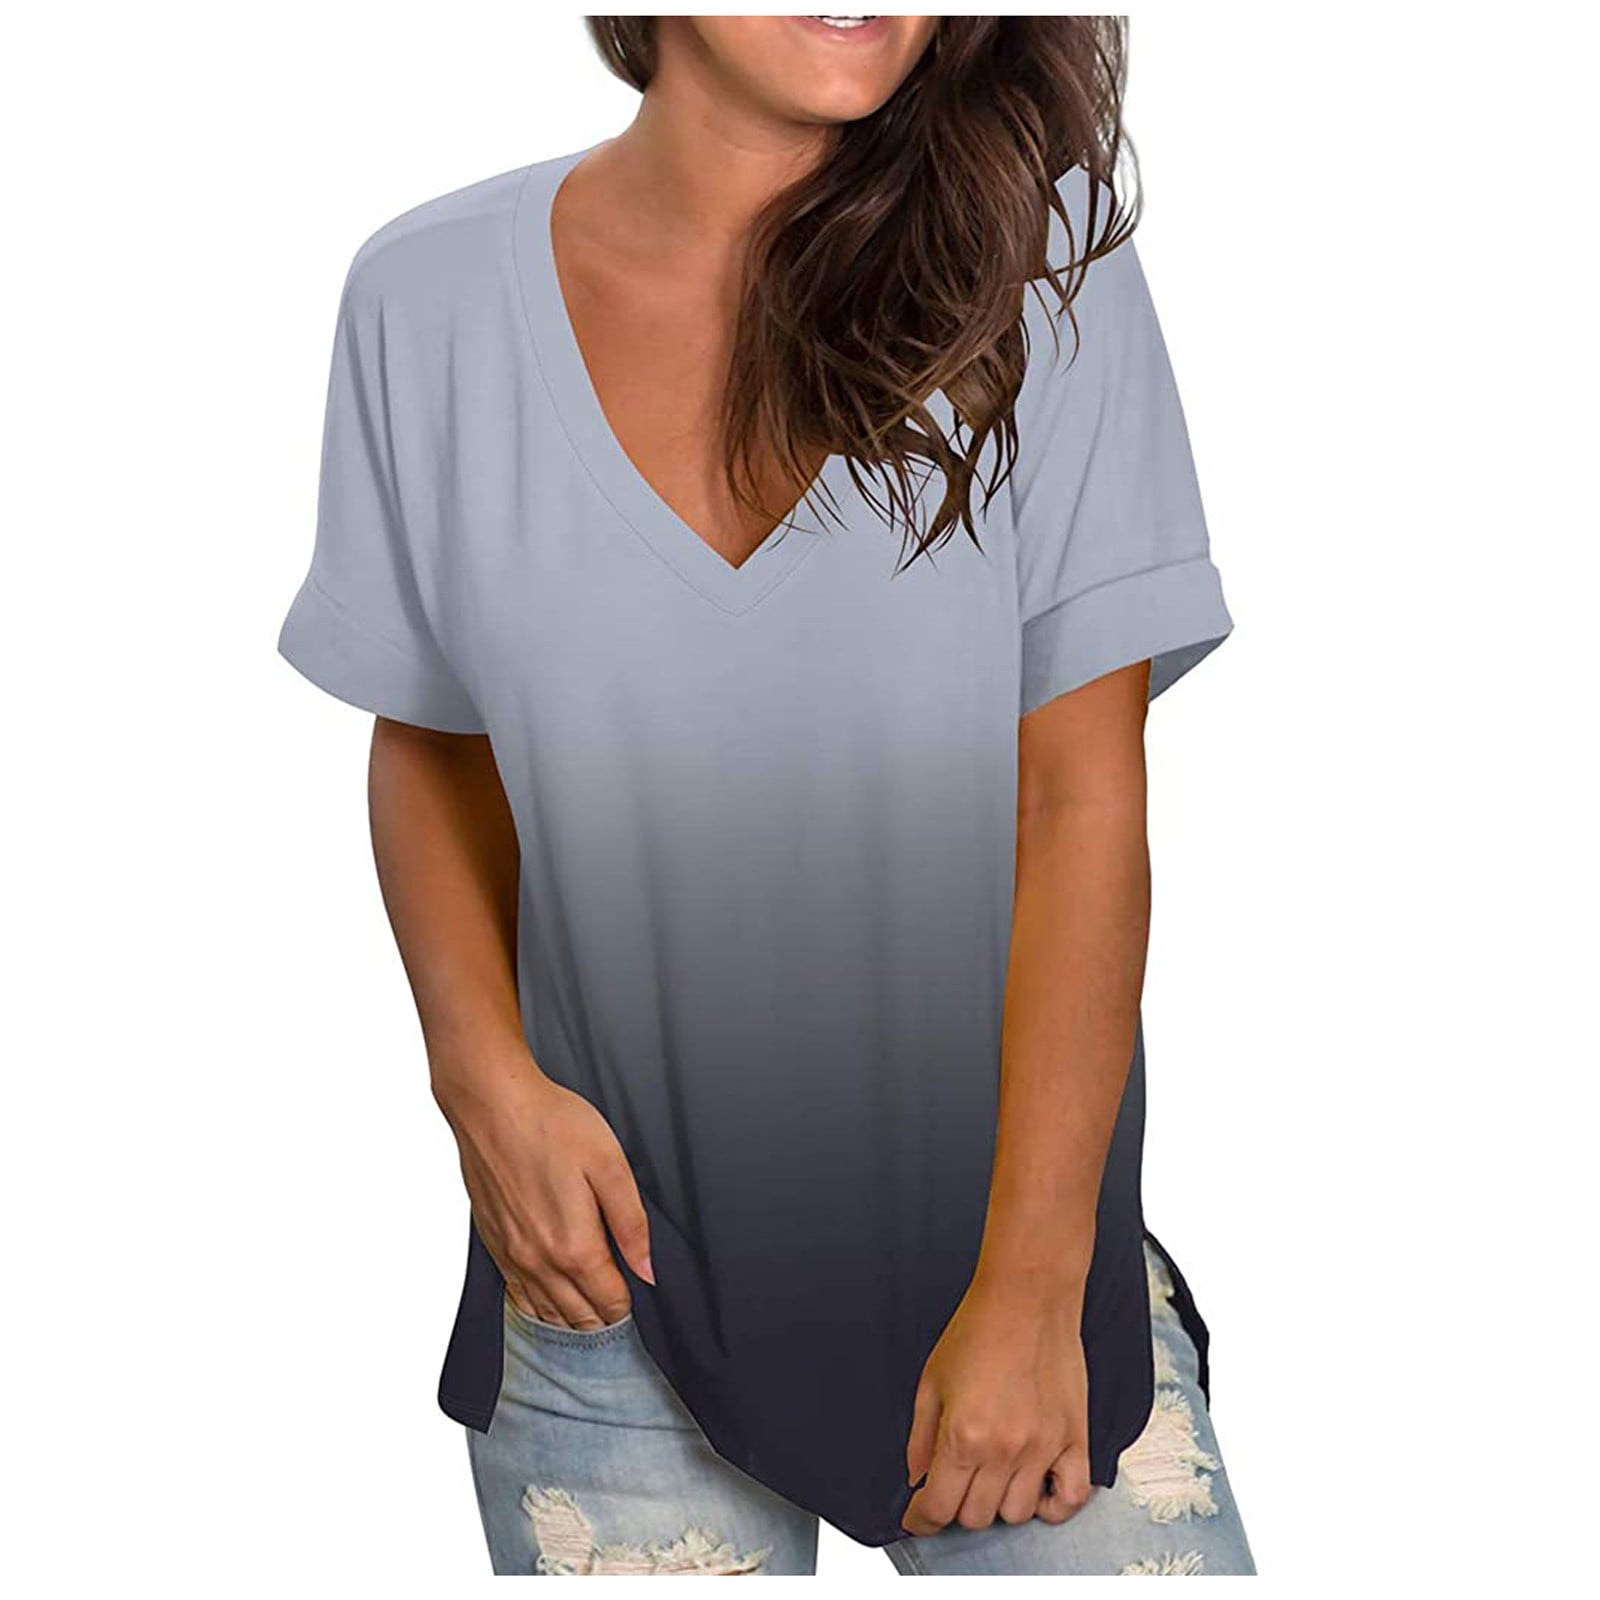 Women Casual Gradient Print T Shirt Short Sleeve Shirt Loose,Online  Shopping Prime,Clearance Clothes for Women,4 Dollar Items,Prime Deals Today  2022